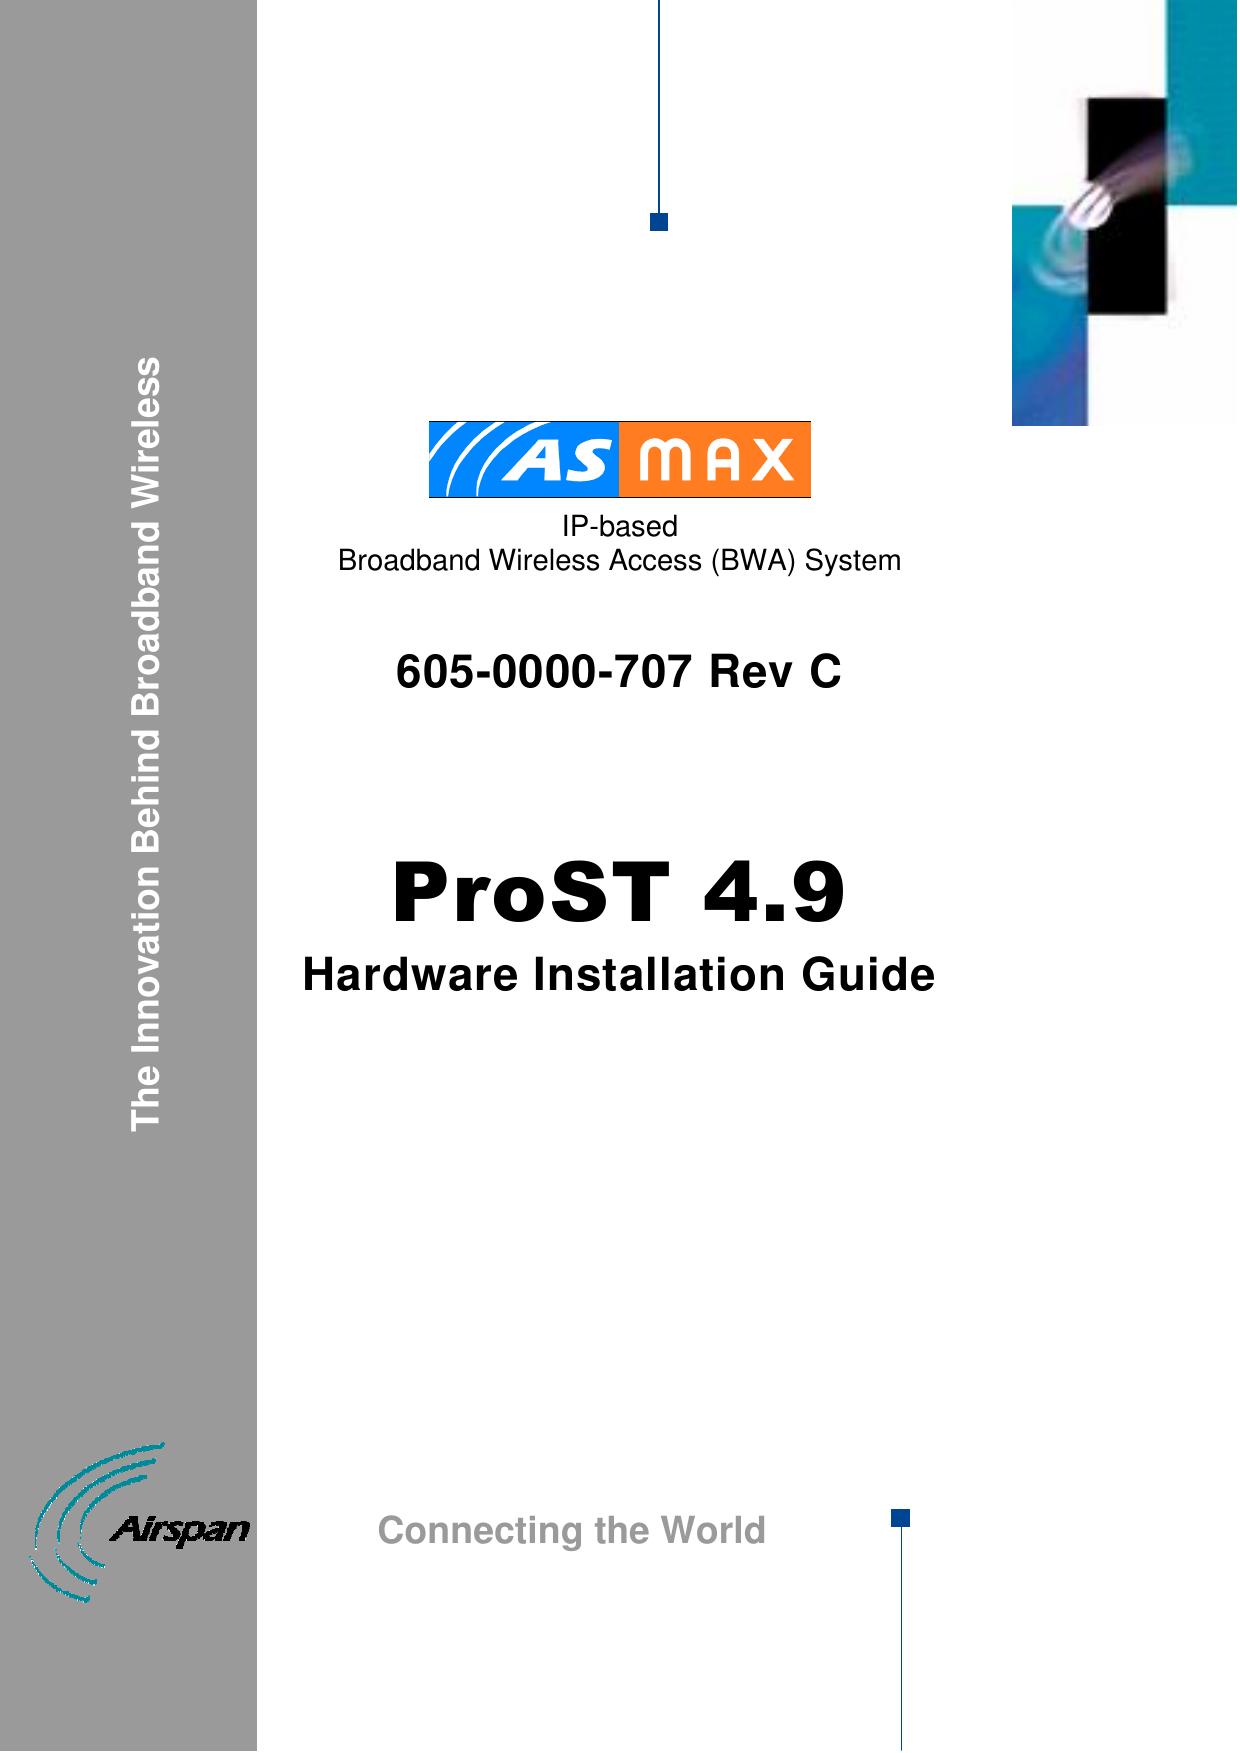          IP-based  Broadband Wireless Access (BWA) System   605-0000-707 Rev C    ProST 4.9 Hardware Installation Guide                                        The Innovation Behind Broadband Wireless Connecting the World  